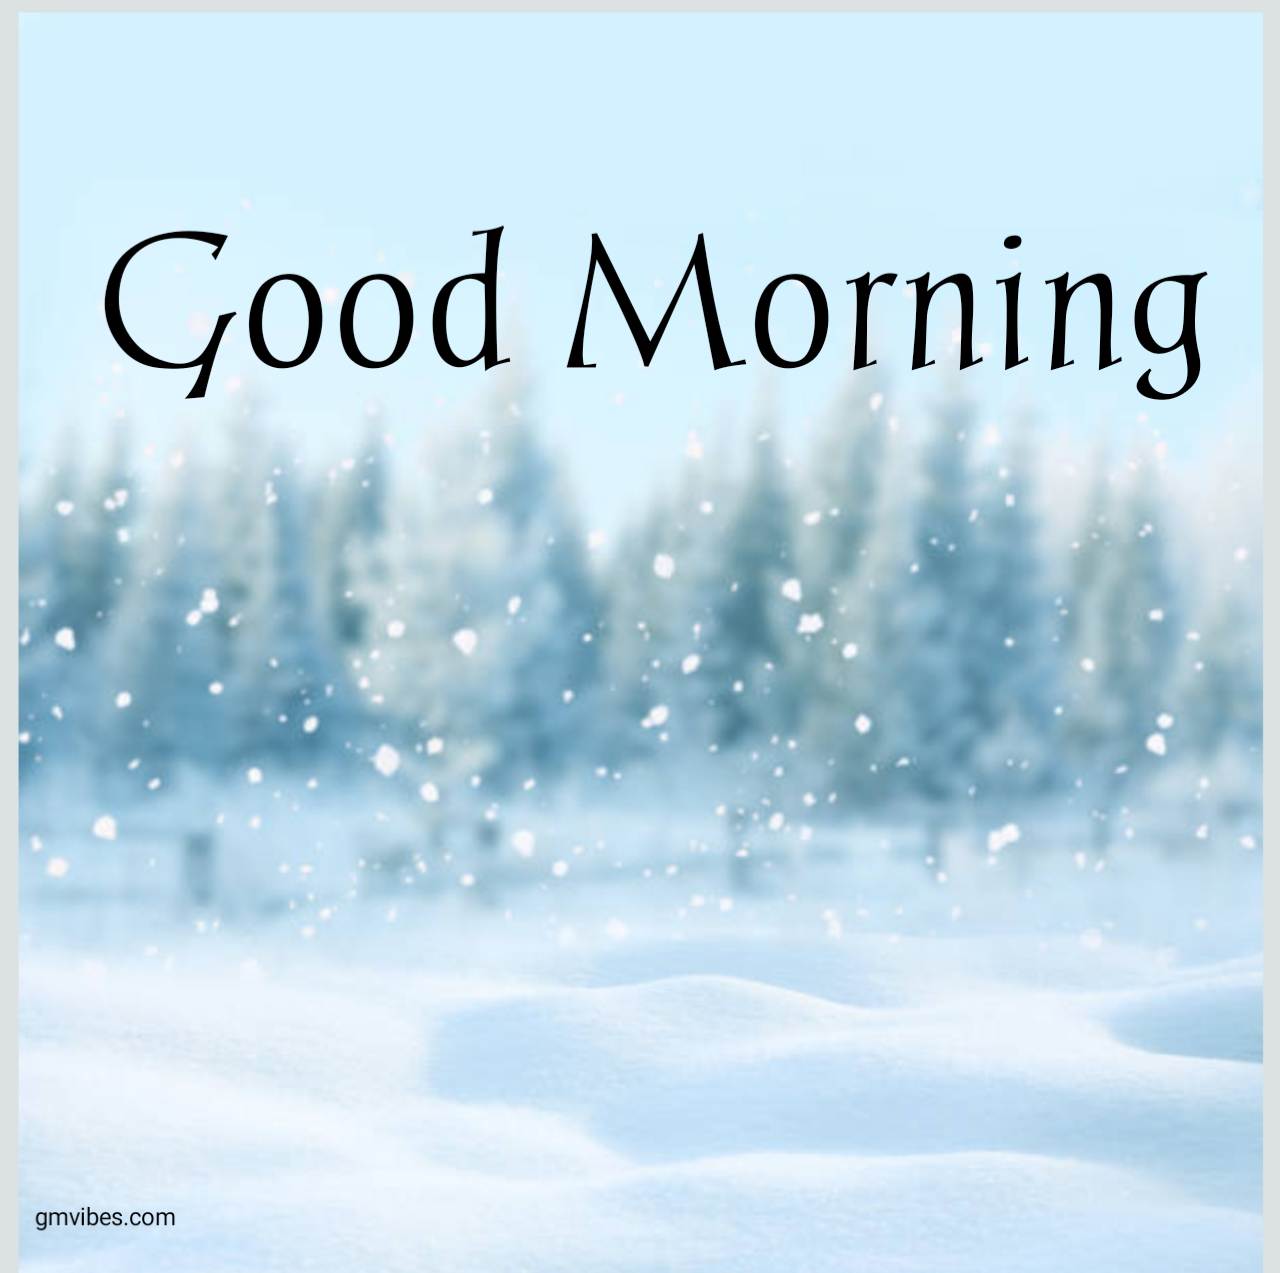 Good Morning Winter Images, Quotes & Messages » GMVibes